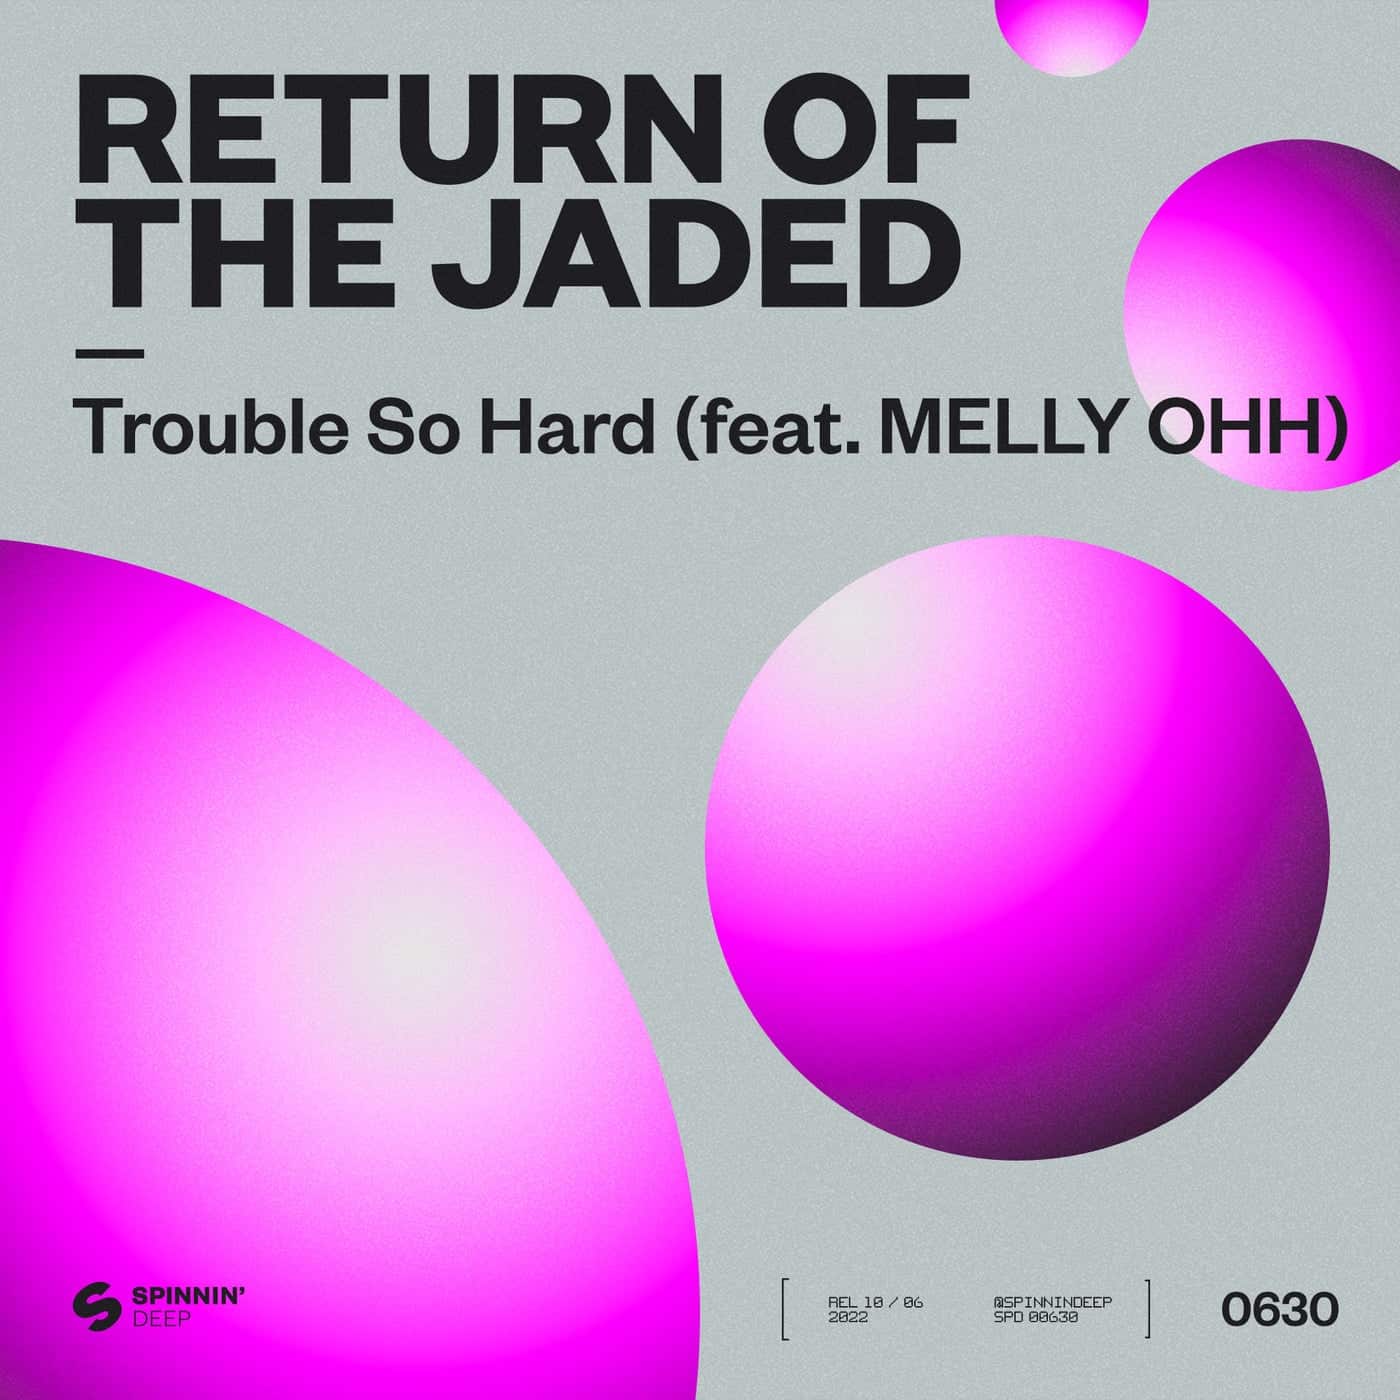 Download Return of the Jaded, Melly OHH - Trouble So Hard (feat. MELLY OHH) [Extended Mix]